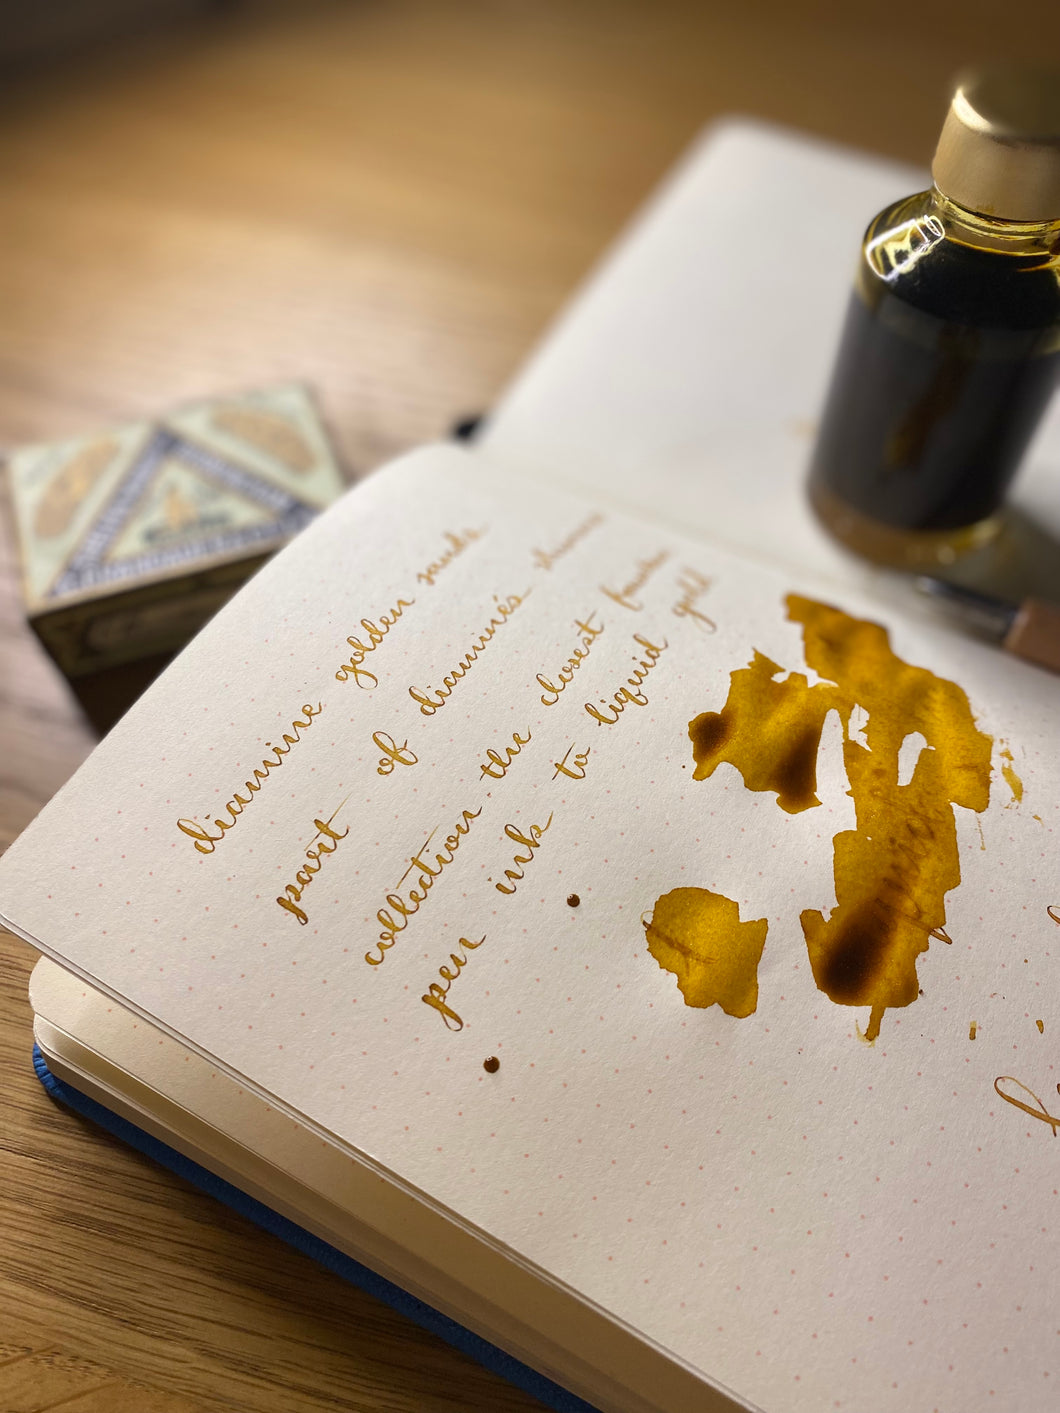 A colour swatch and writing swatch of Diamine Golden Sands shimmering fountain pen ink.